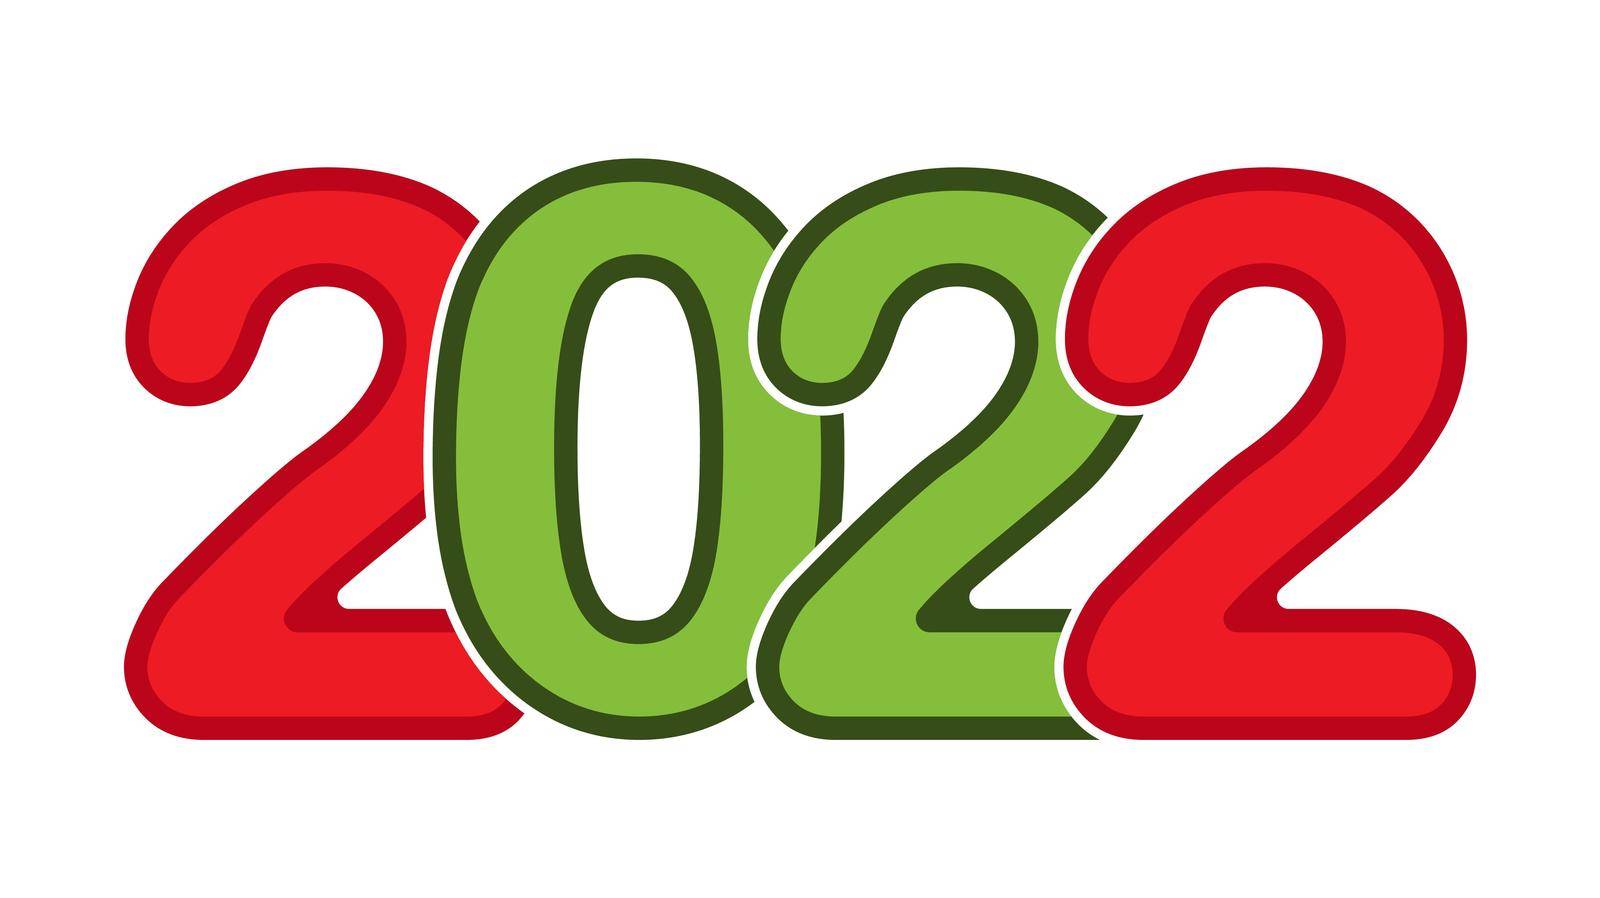 number is 2022. The new year is 2022. Merry Christmas and Happy New Year. Vector illustration.